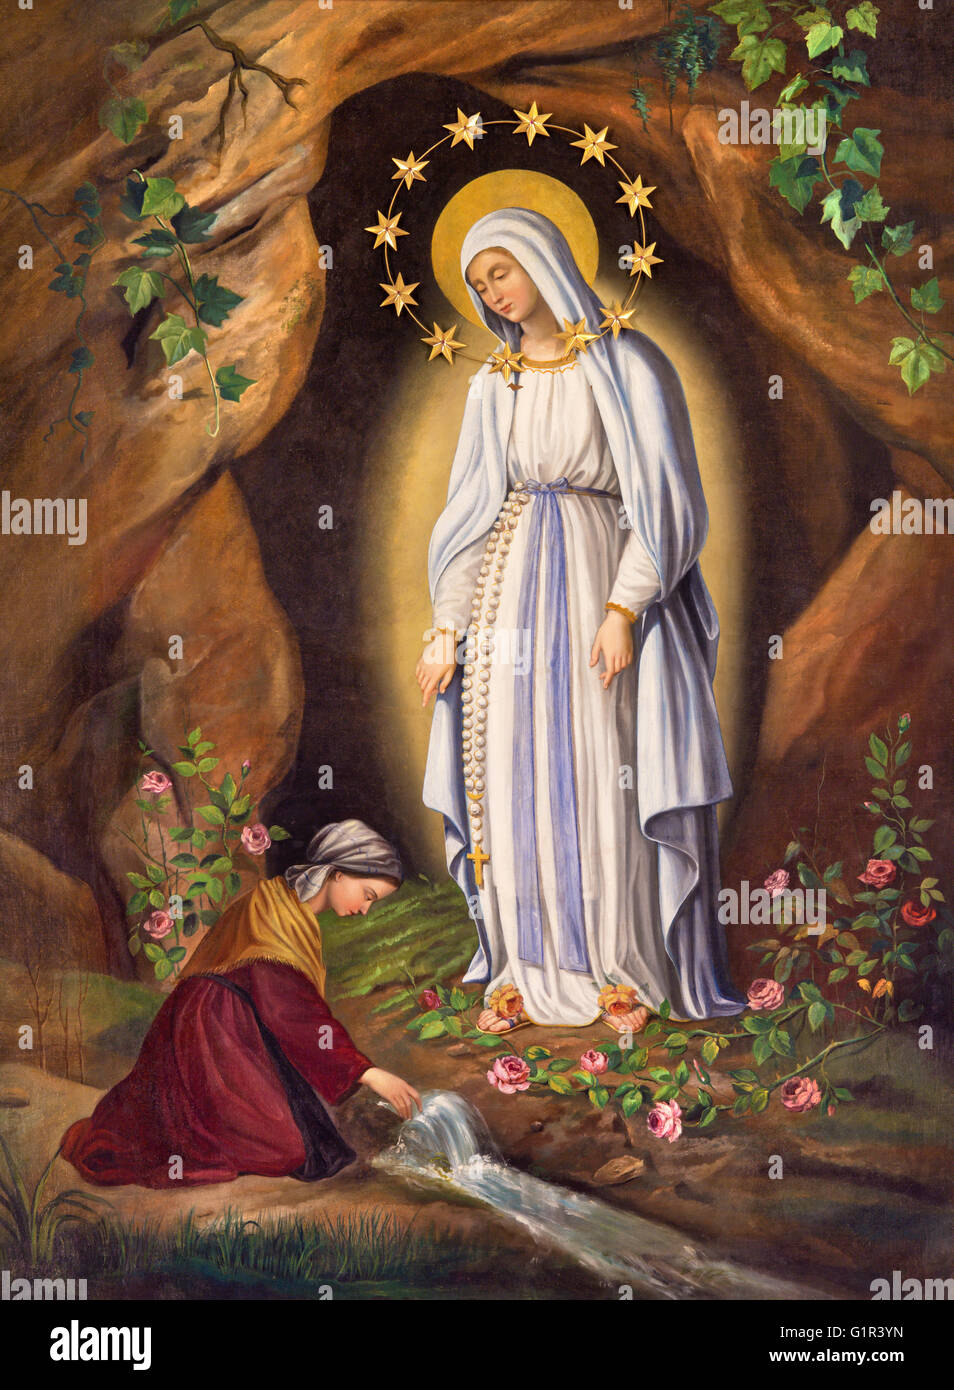 ROME, ITALY - MARCH 9, 2016: The Appearance of Virgin to st. Bernadette in Lourdes by unknown artist (1873) Stock Photo